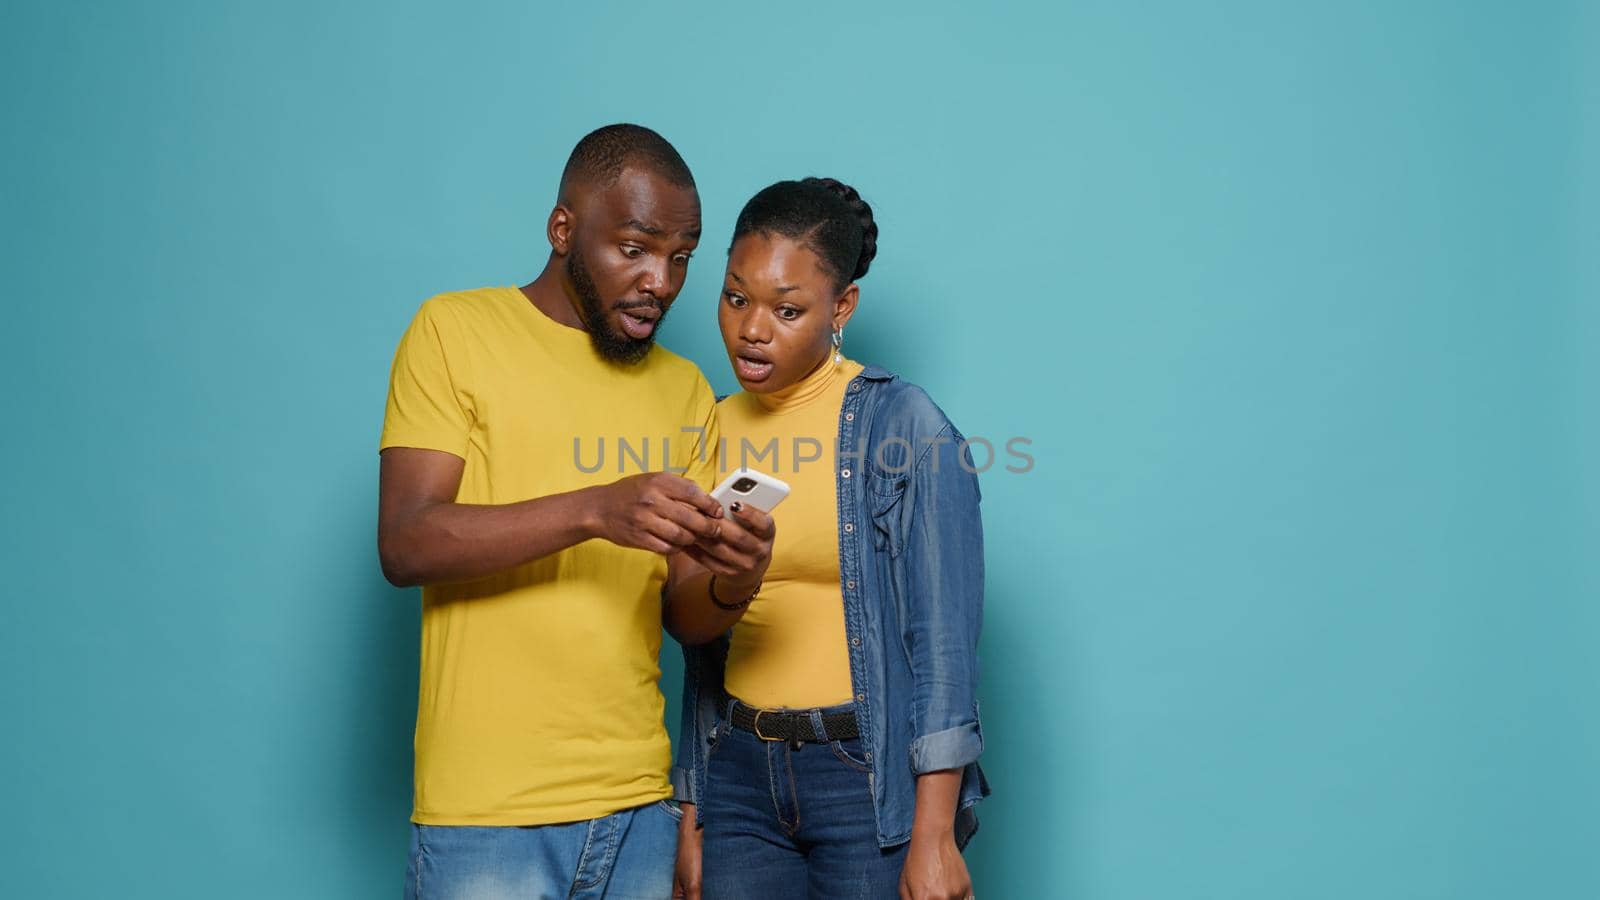 Man and woman using internet on smartphone together in front of camera. People looking at mobile phone display and having positive connection. Modern couple working with technology.